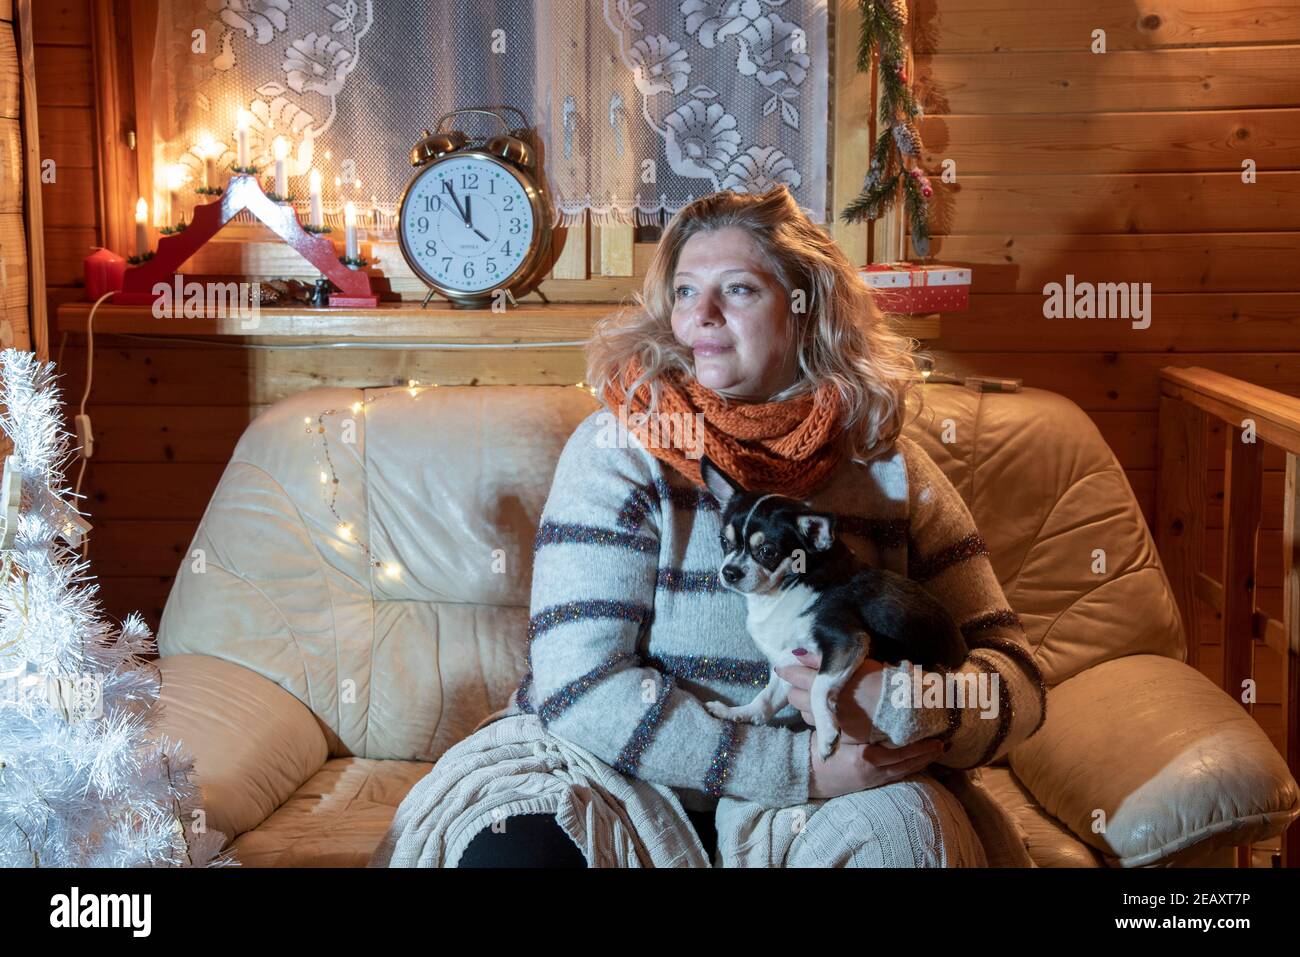 Portrait of a plump, middle-aged blonde woman sitting on a sofa with a Chihuahua . Stock Photo